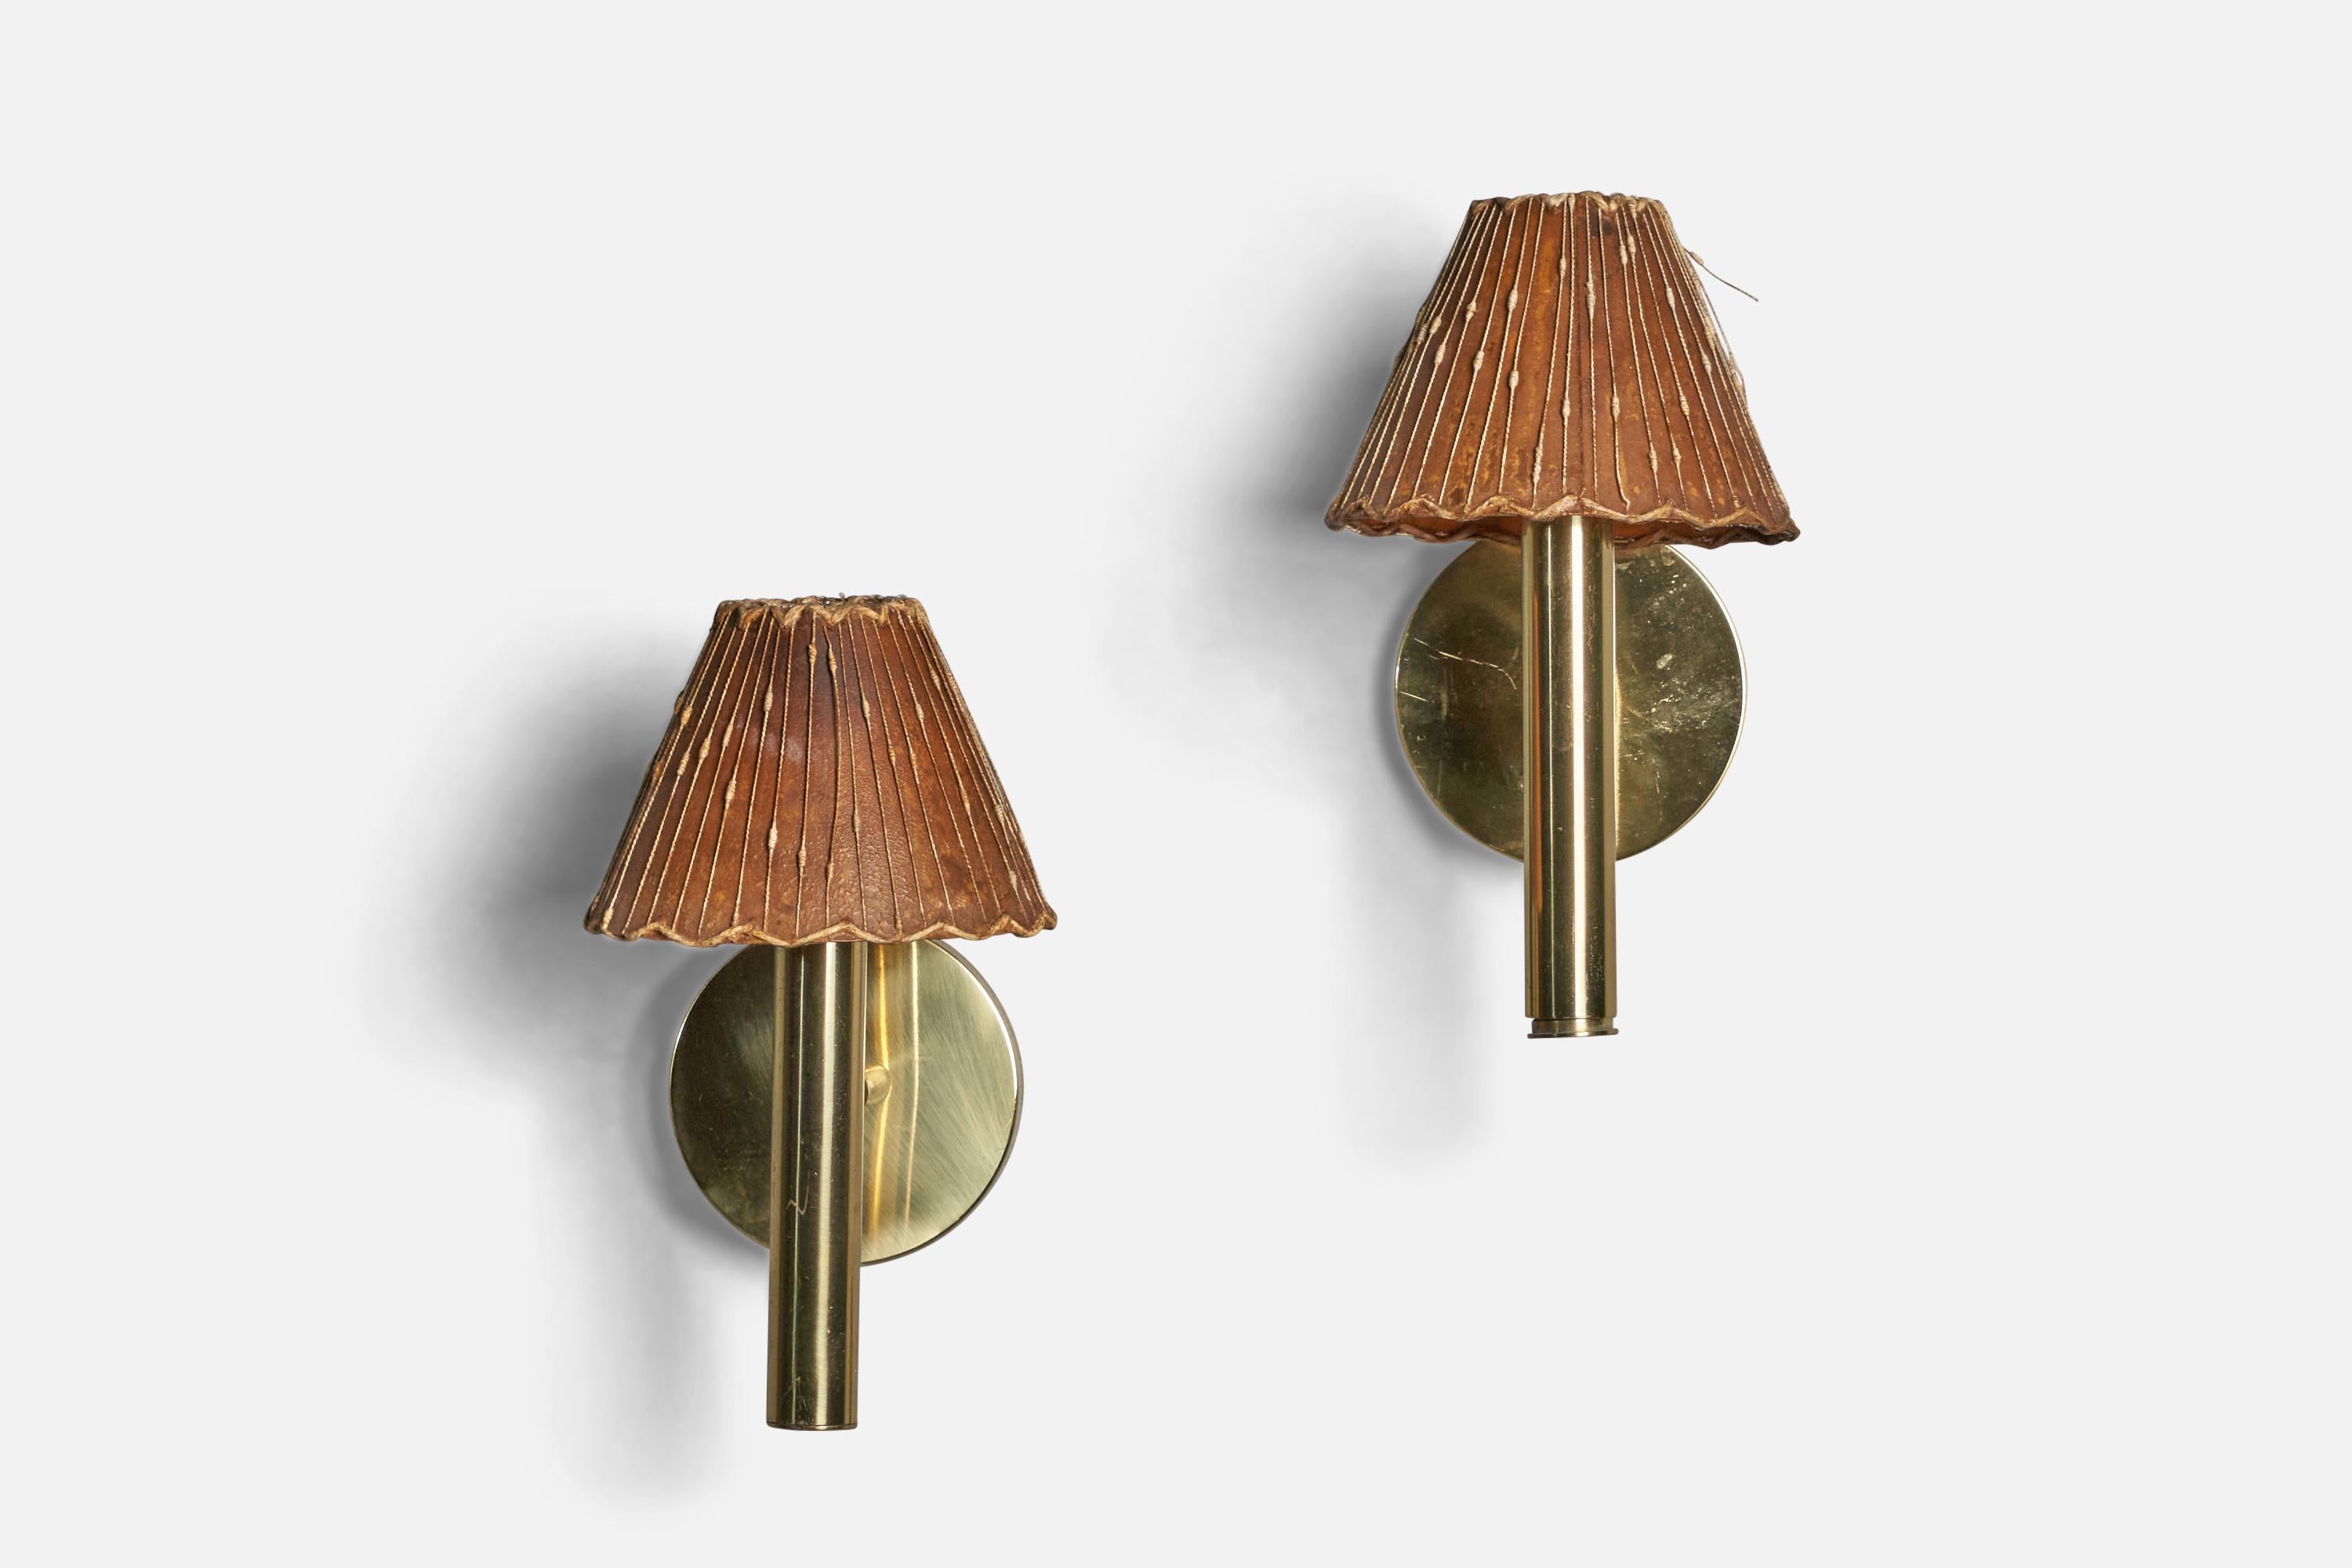 A pair of brass and parchment paper wall lights designed by Svend Mejlstrøm and produced by MS Belysning, Norway, c. 1960s.

Overall Dimensions (inches): 9” H x 5” W x 6.75” D
Back Plate Dimensions (inches): 3.95” Diameter x 0.8” D
Bulb